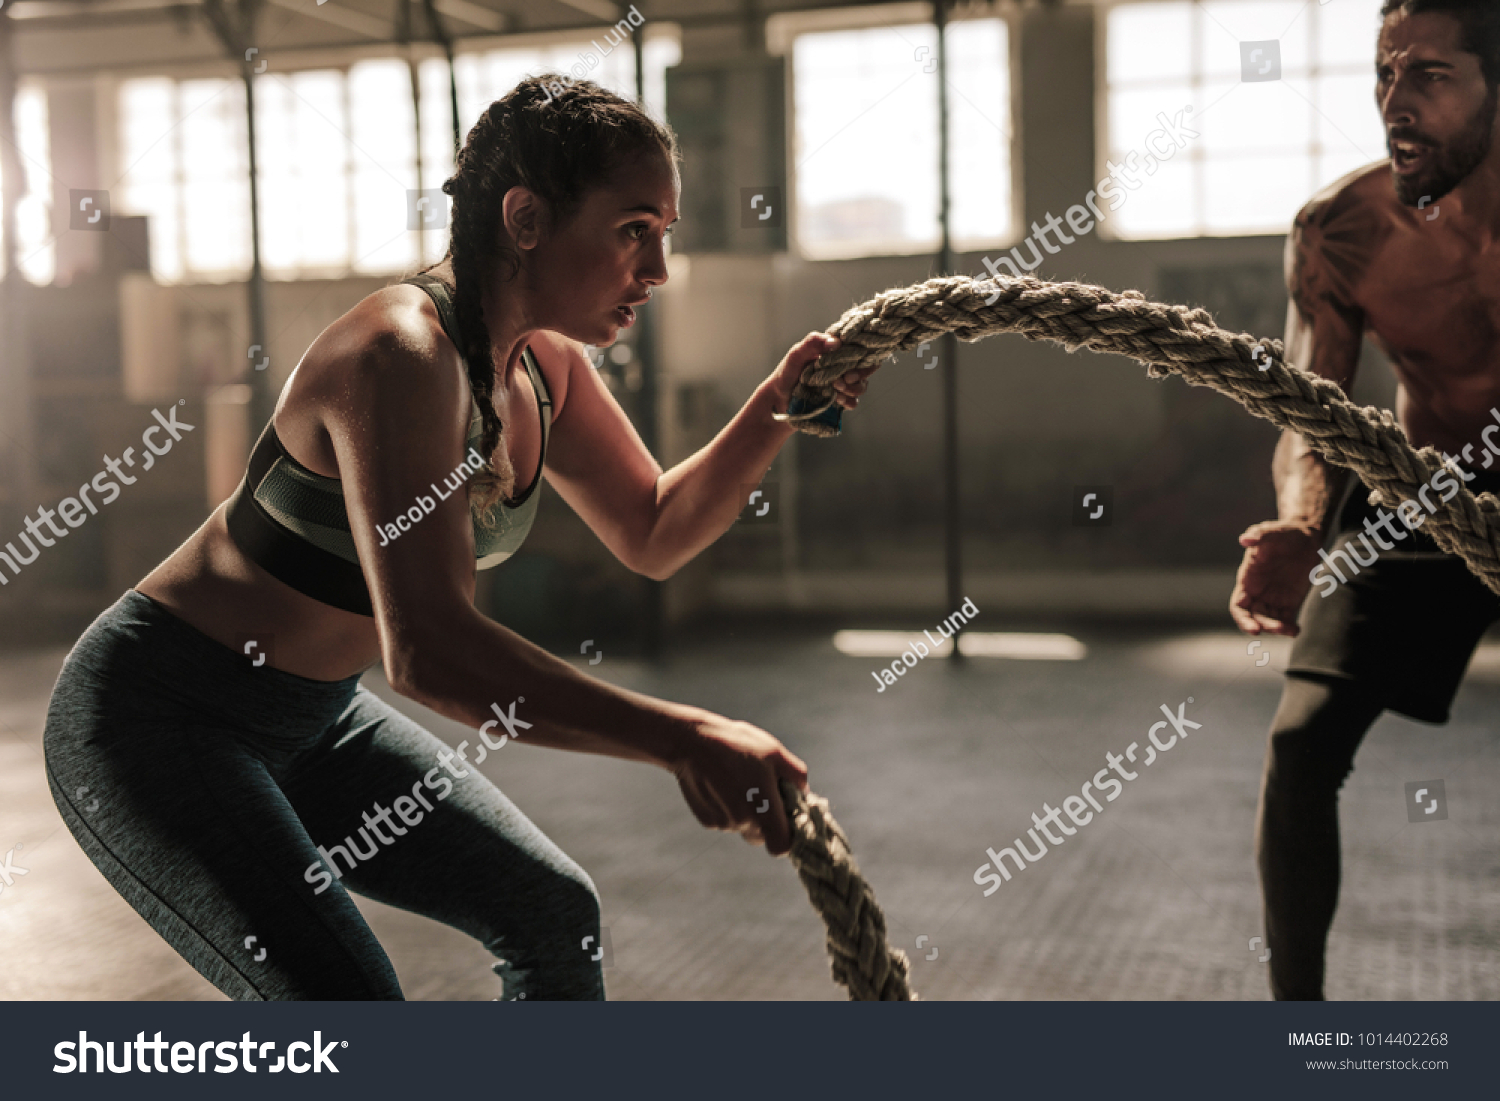 Strong woman exercising with battle ropes at the gym with male trainer. Athlete doing battle rope workout at gym with instructor. #1014402268